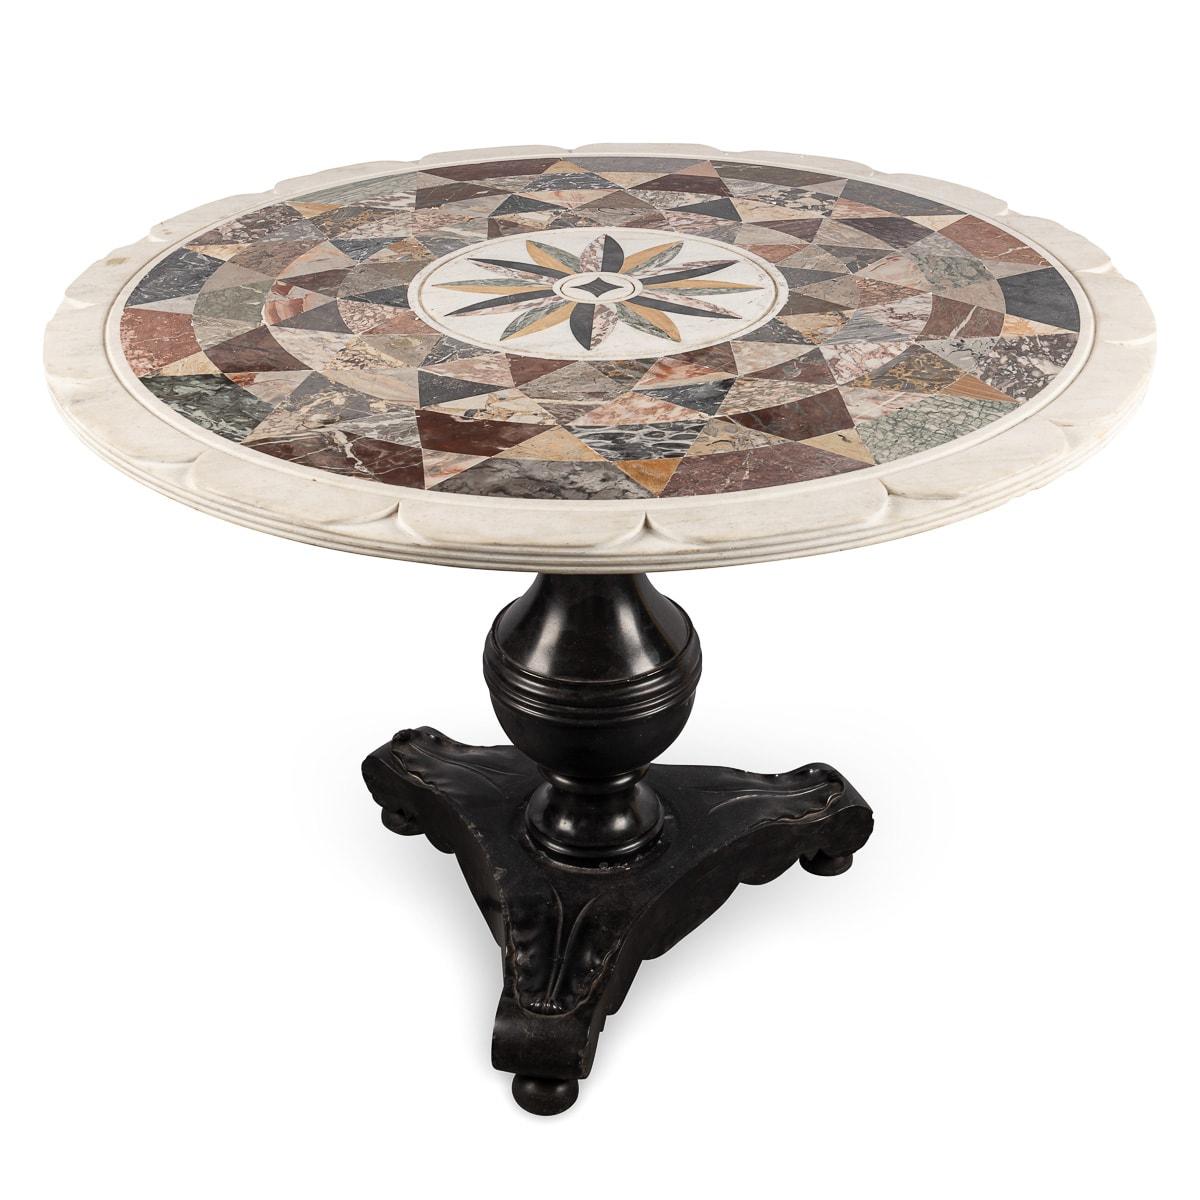 A mid-20th Century Italian Pietra Dura marble occasional table. Elegantly made with a range of different geometric cut marble inserts. The table features a beveled edge and petal shaped lip on the tabletop. The base, made out of ebonised wood is